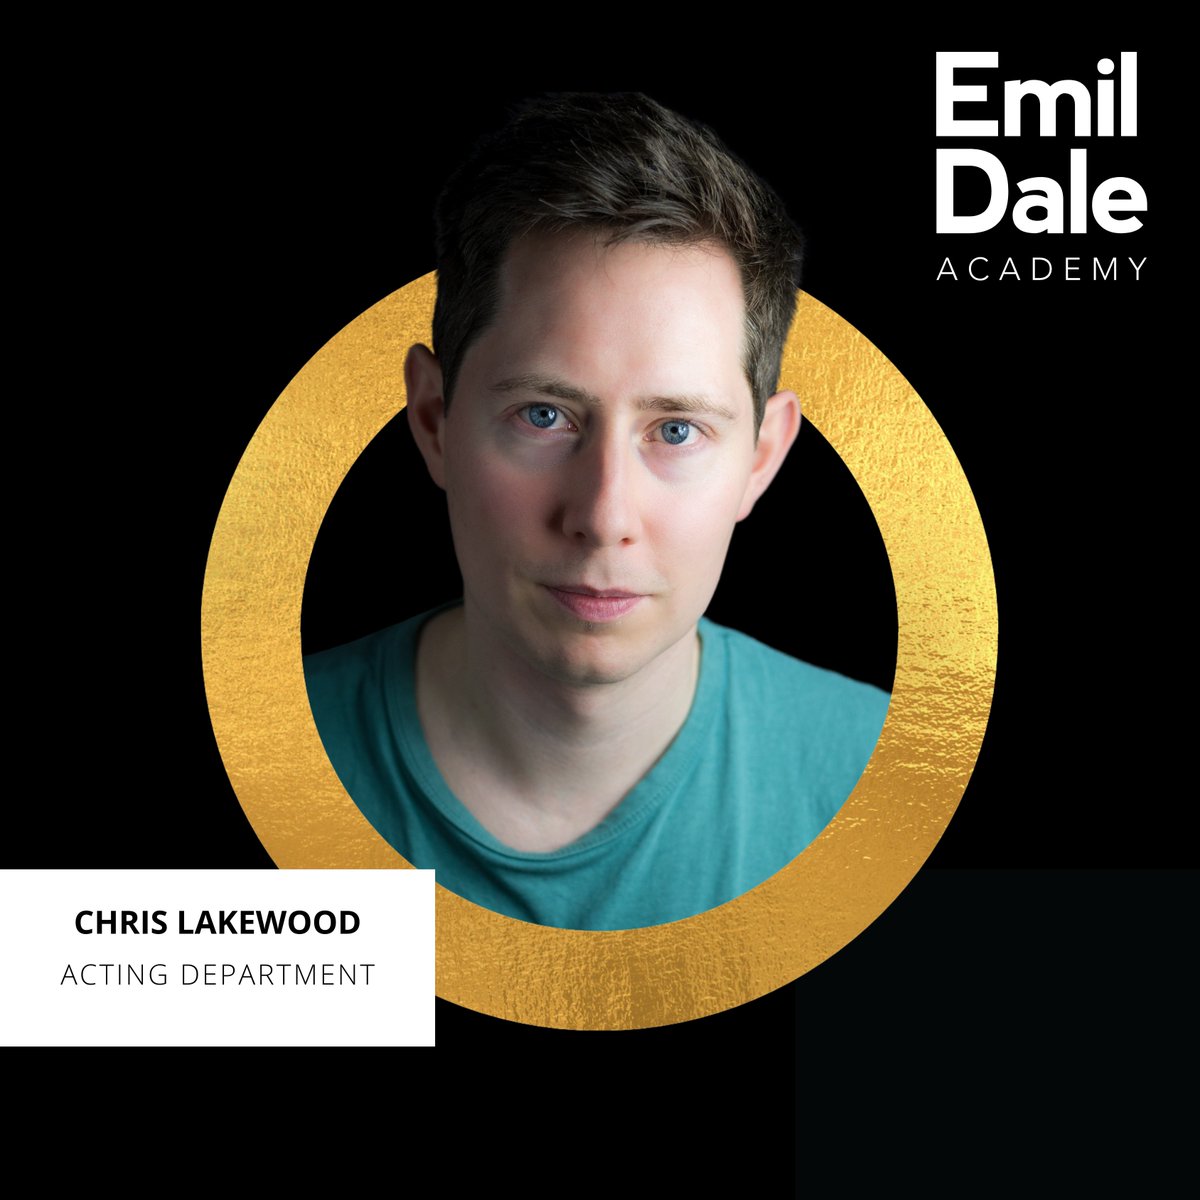 ⭐️ Welcoming guest teacher Chris Lakewood who will be teaching within the Acting Department next term! Chris (he/him) is a London-based speech and performance coach. You can find out more about Chris and his work on his website: lakewoodamdc.co.uk #jazz #dramaschool